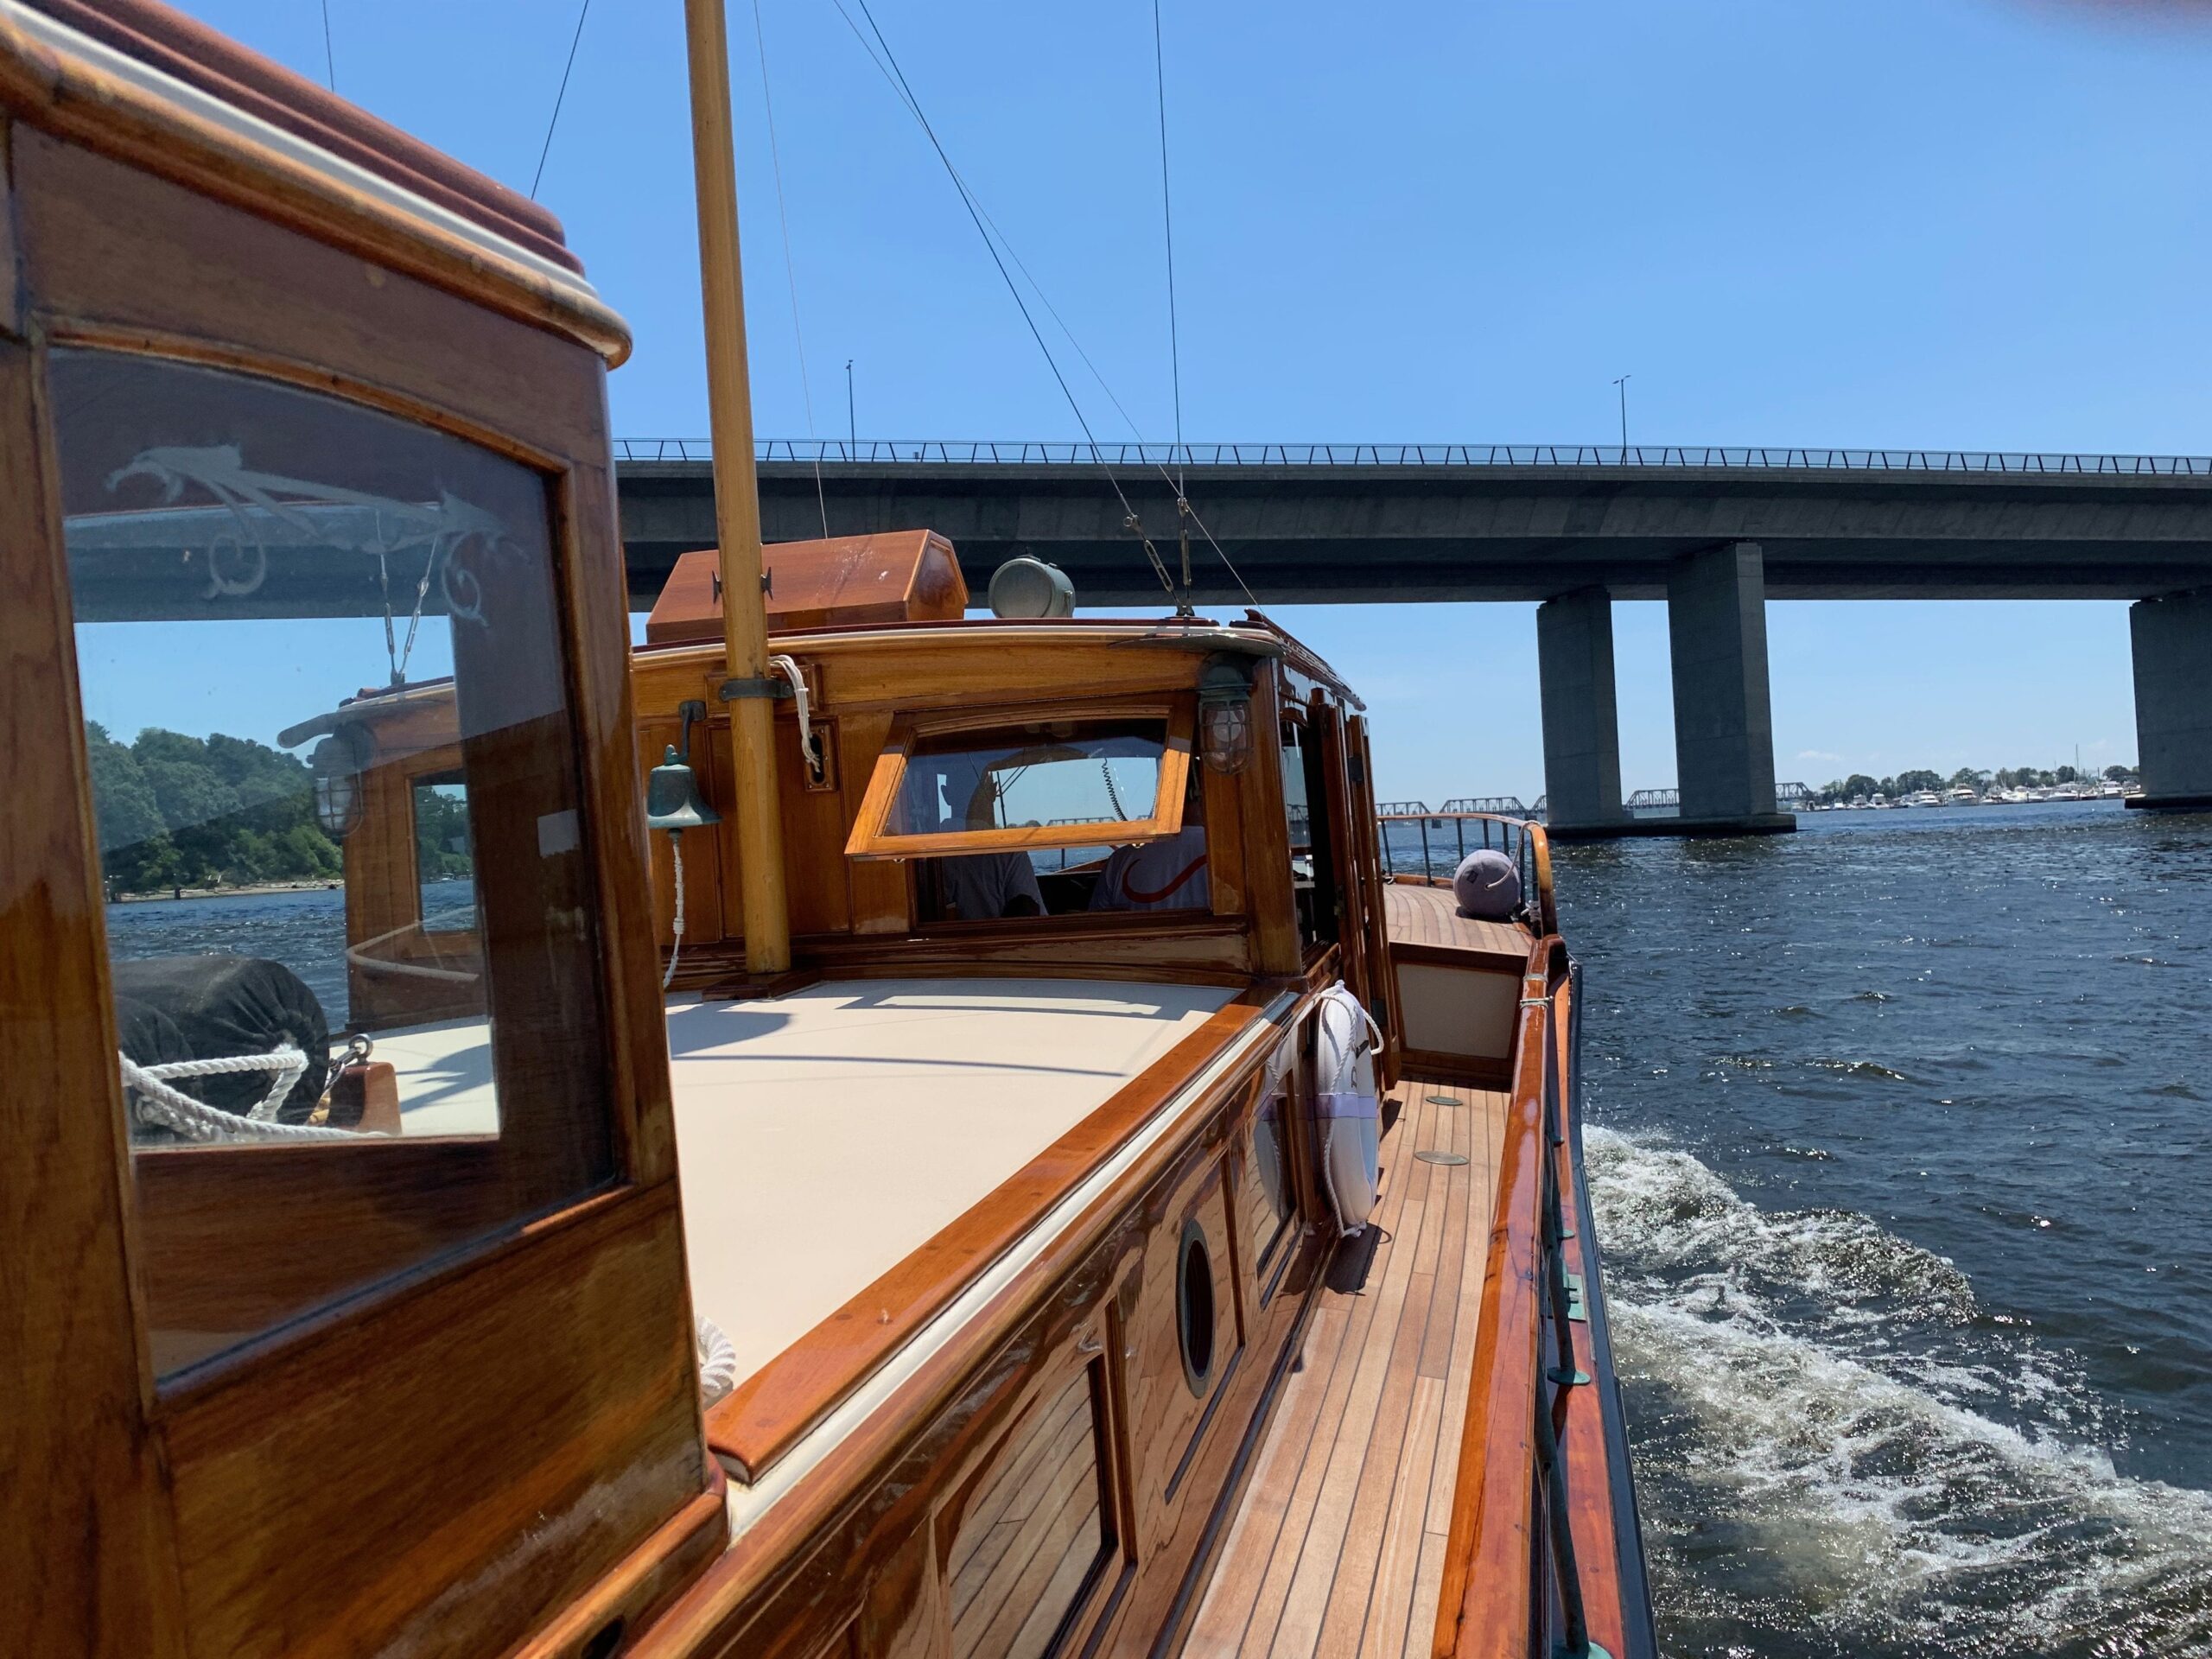 Hitching a Ride on a 1920s Boat Heading to the WoodenBoat Show at Mystic -  CT Examiner